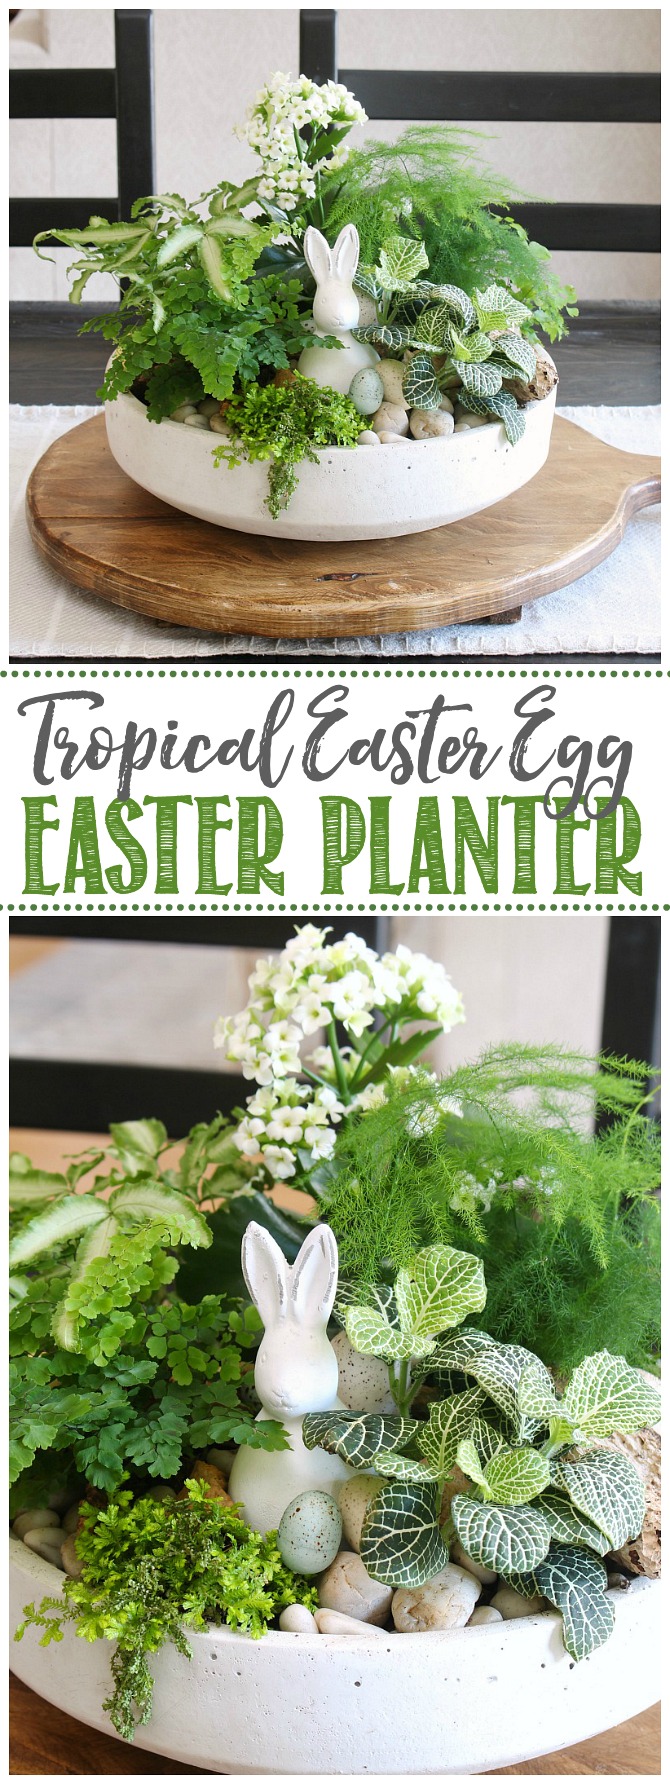 Easter planter with tropical plants and Easter bunny.